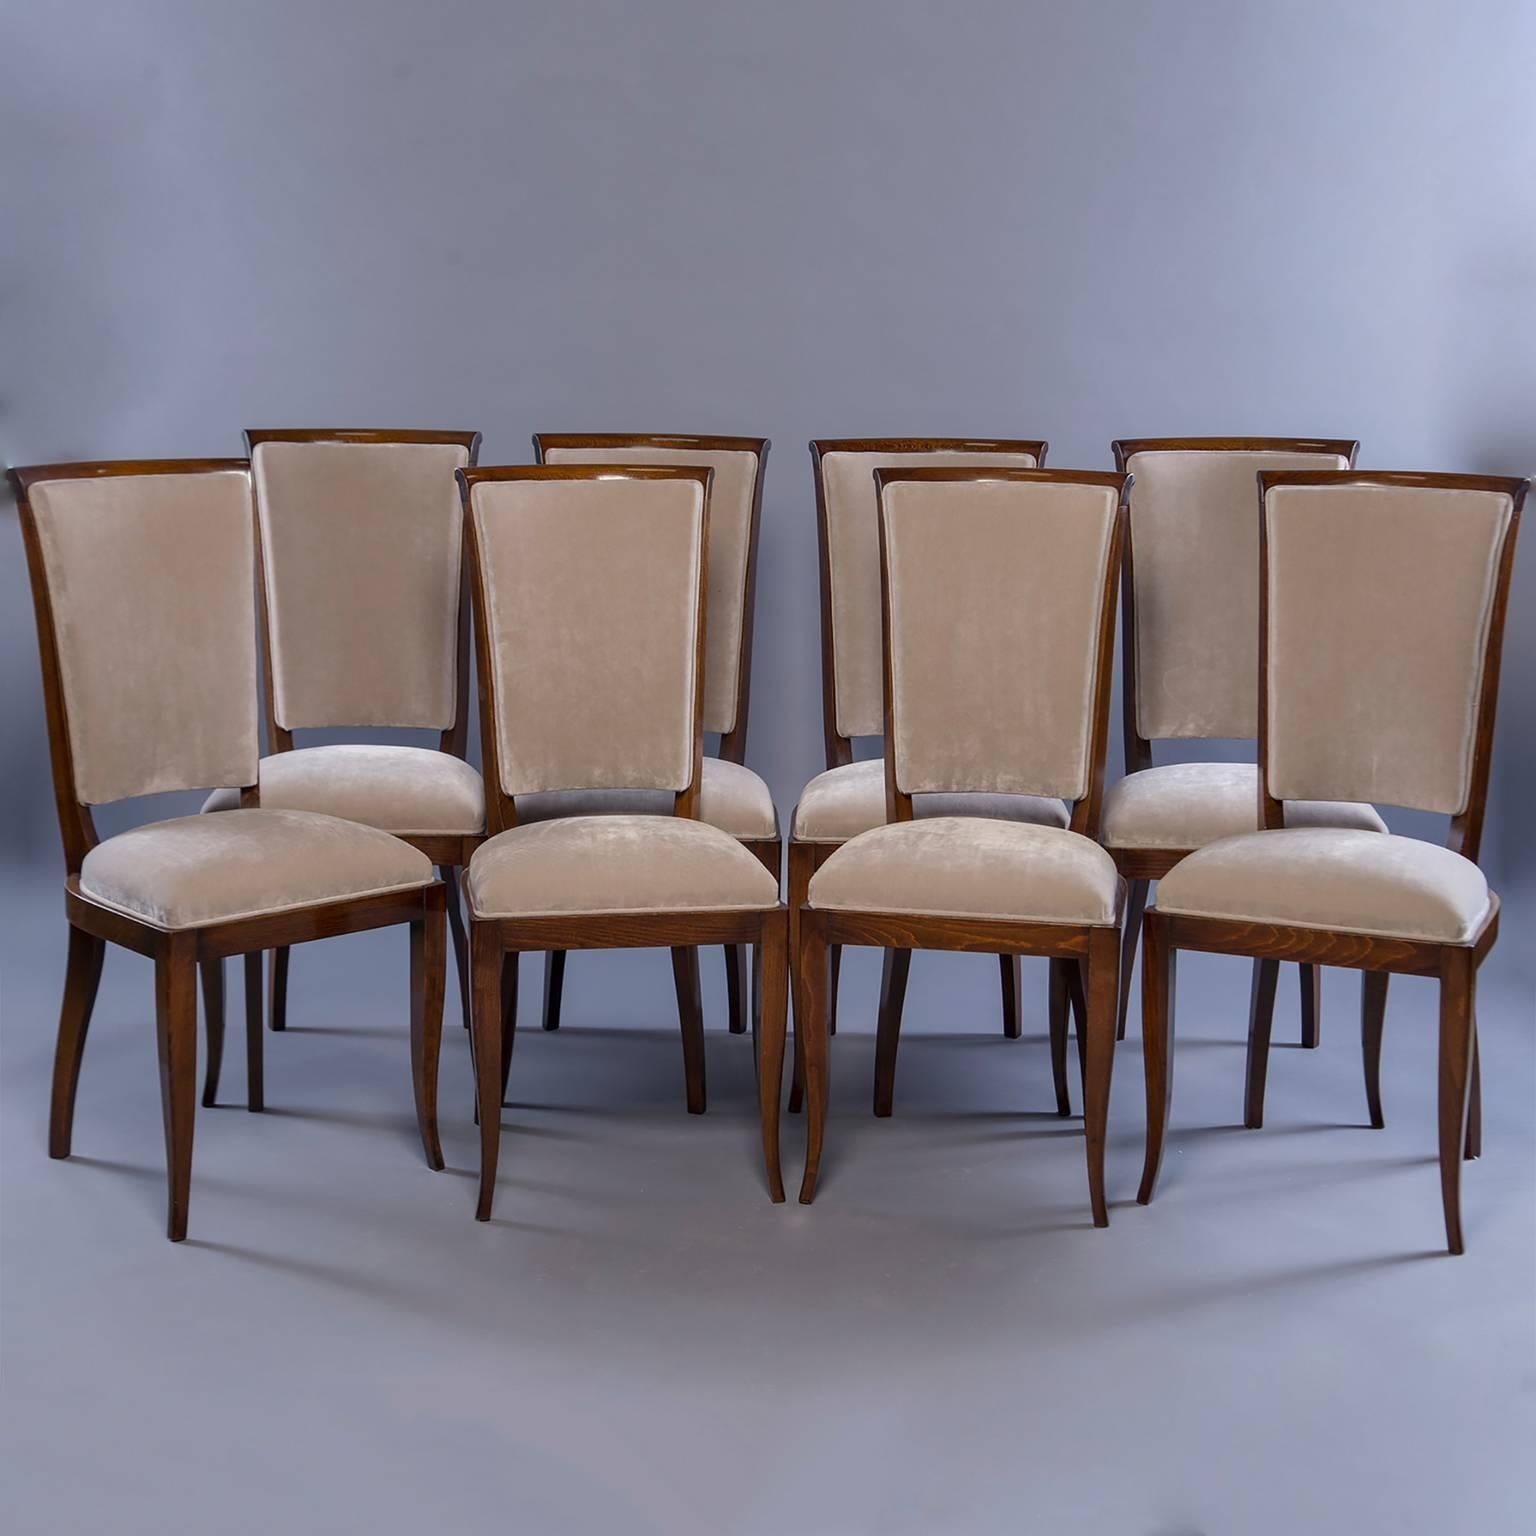 Set of eight Italian dining chairs with polished walnut frames and new sand colored velvet upholstery on seats and backs, circa 1960s. Seats are 19.5” high and 14.5” deep. Sold and priced as a set of eight.
 